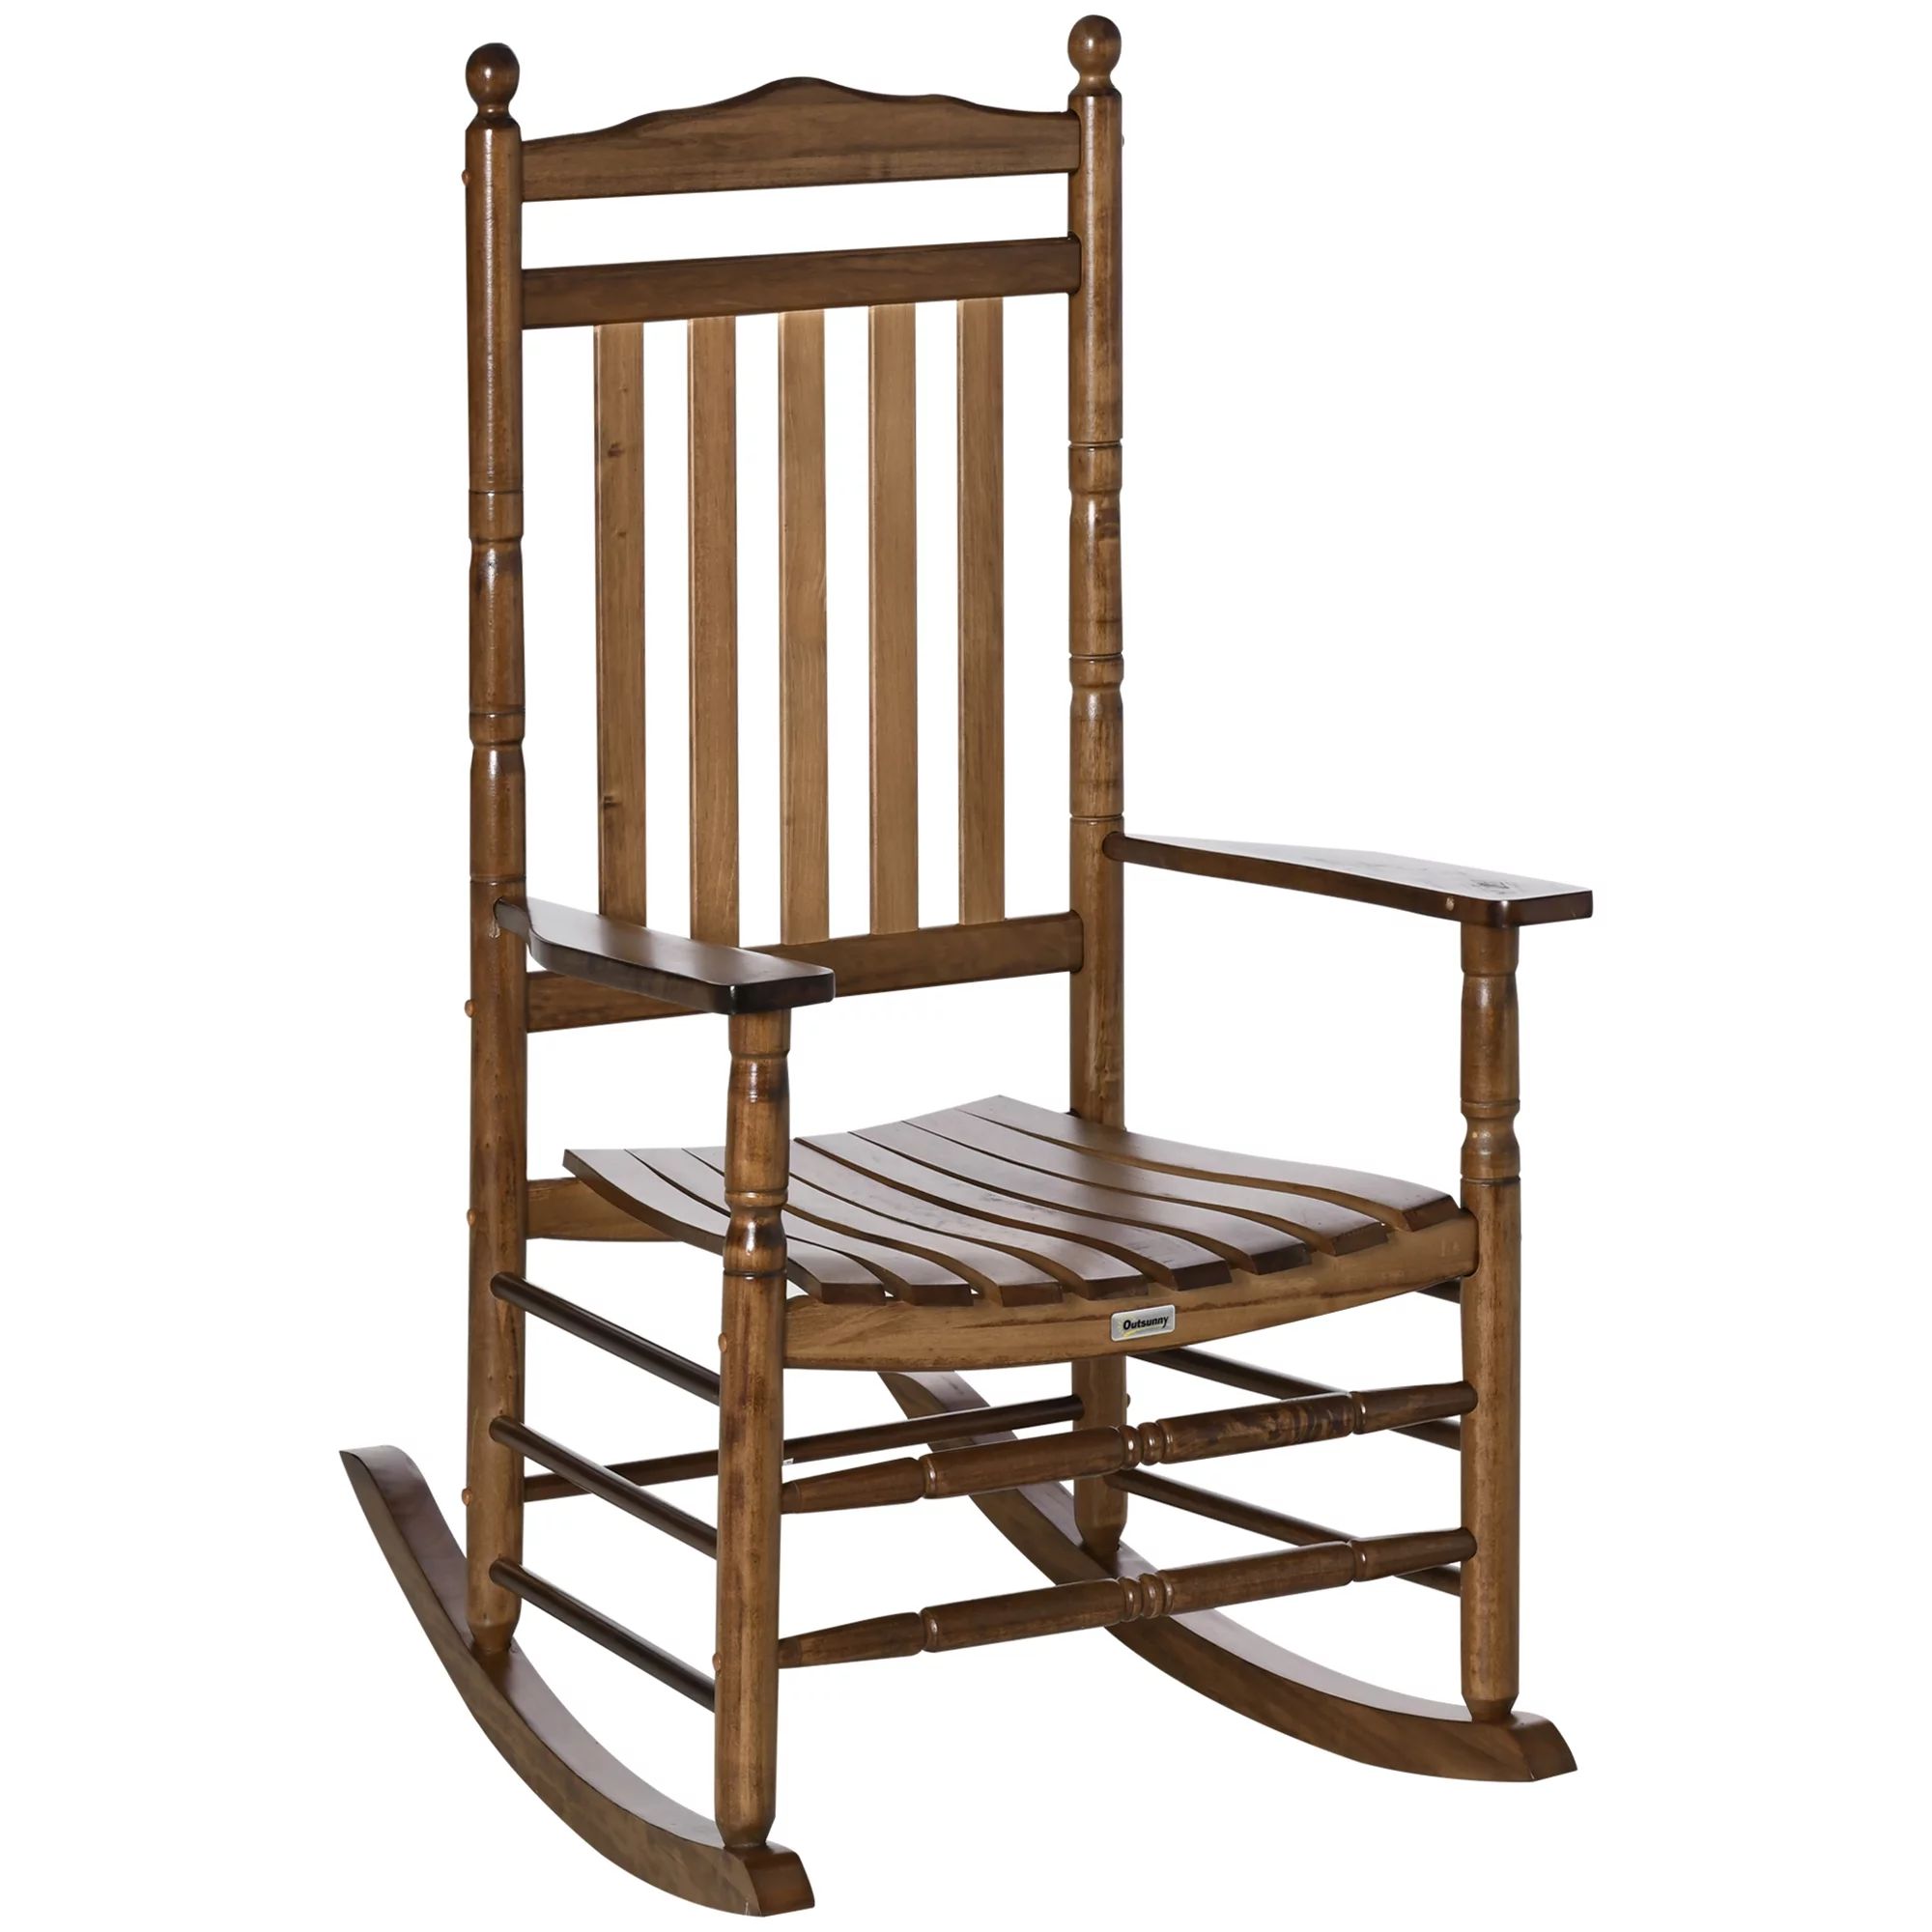 Outsunny Traditional Wooden High-Back Rocking Chair for Porch, Indoor/Outdoor, Brown | Walmart (US)